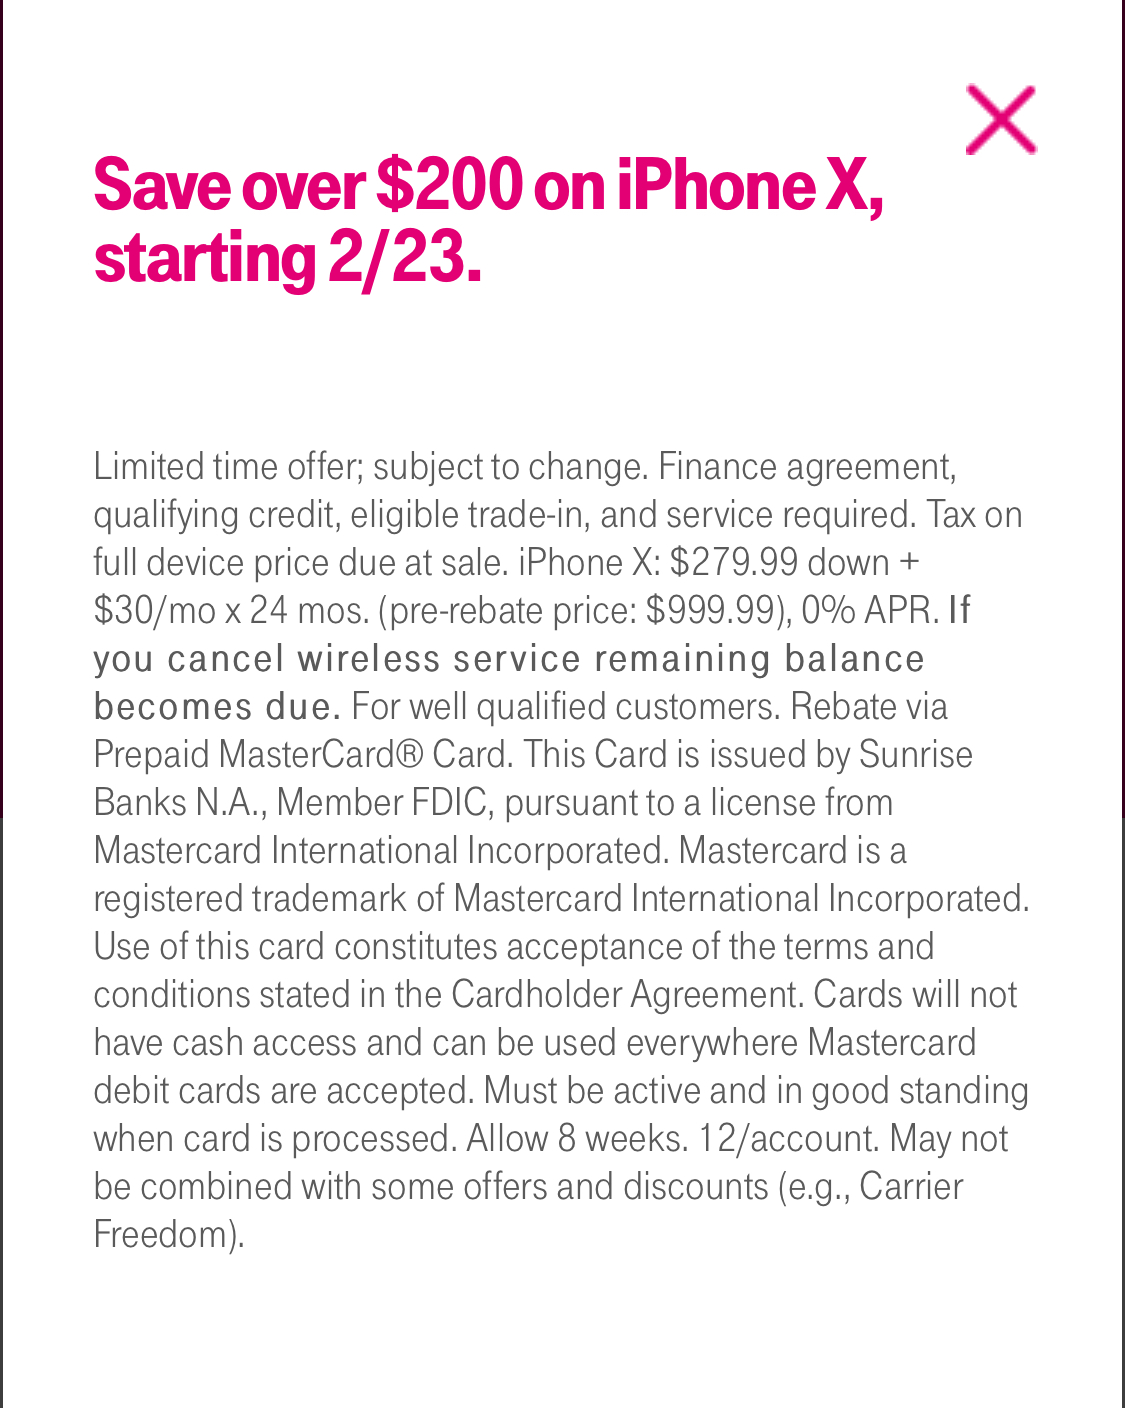 T Mobile Announces 200 Rebate Offer For IPhones And BOGO Deal For 